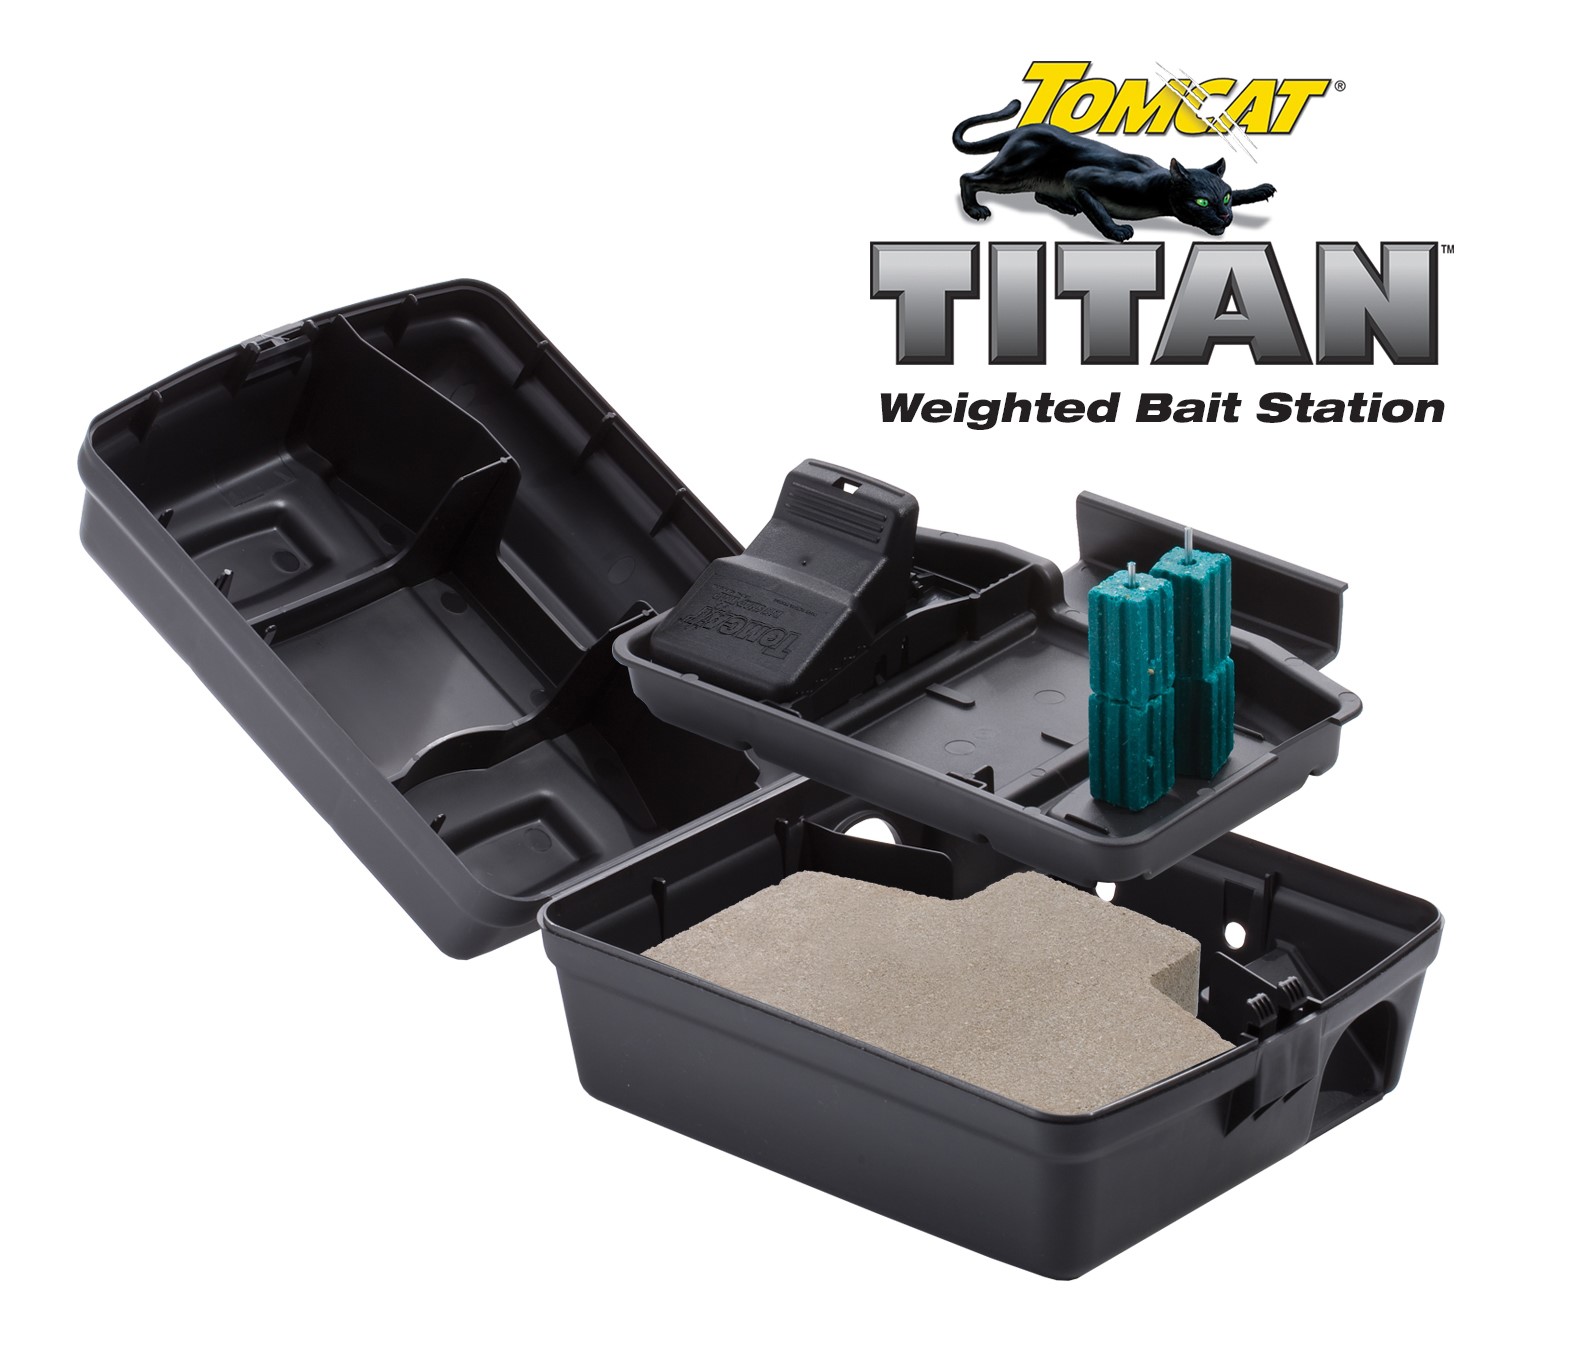 Motomco introduces new Tomcat Titan weighted bait station